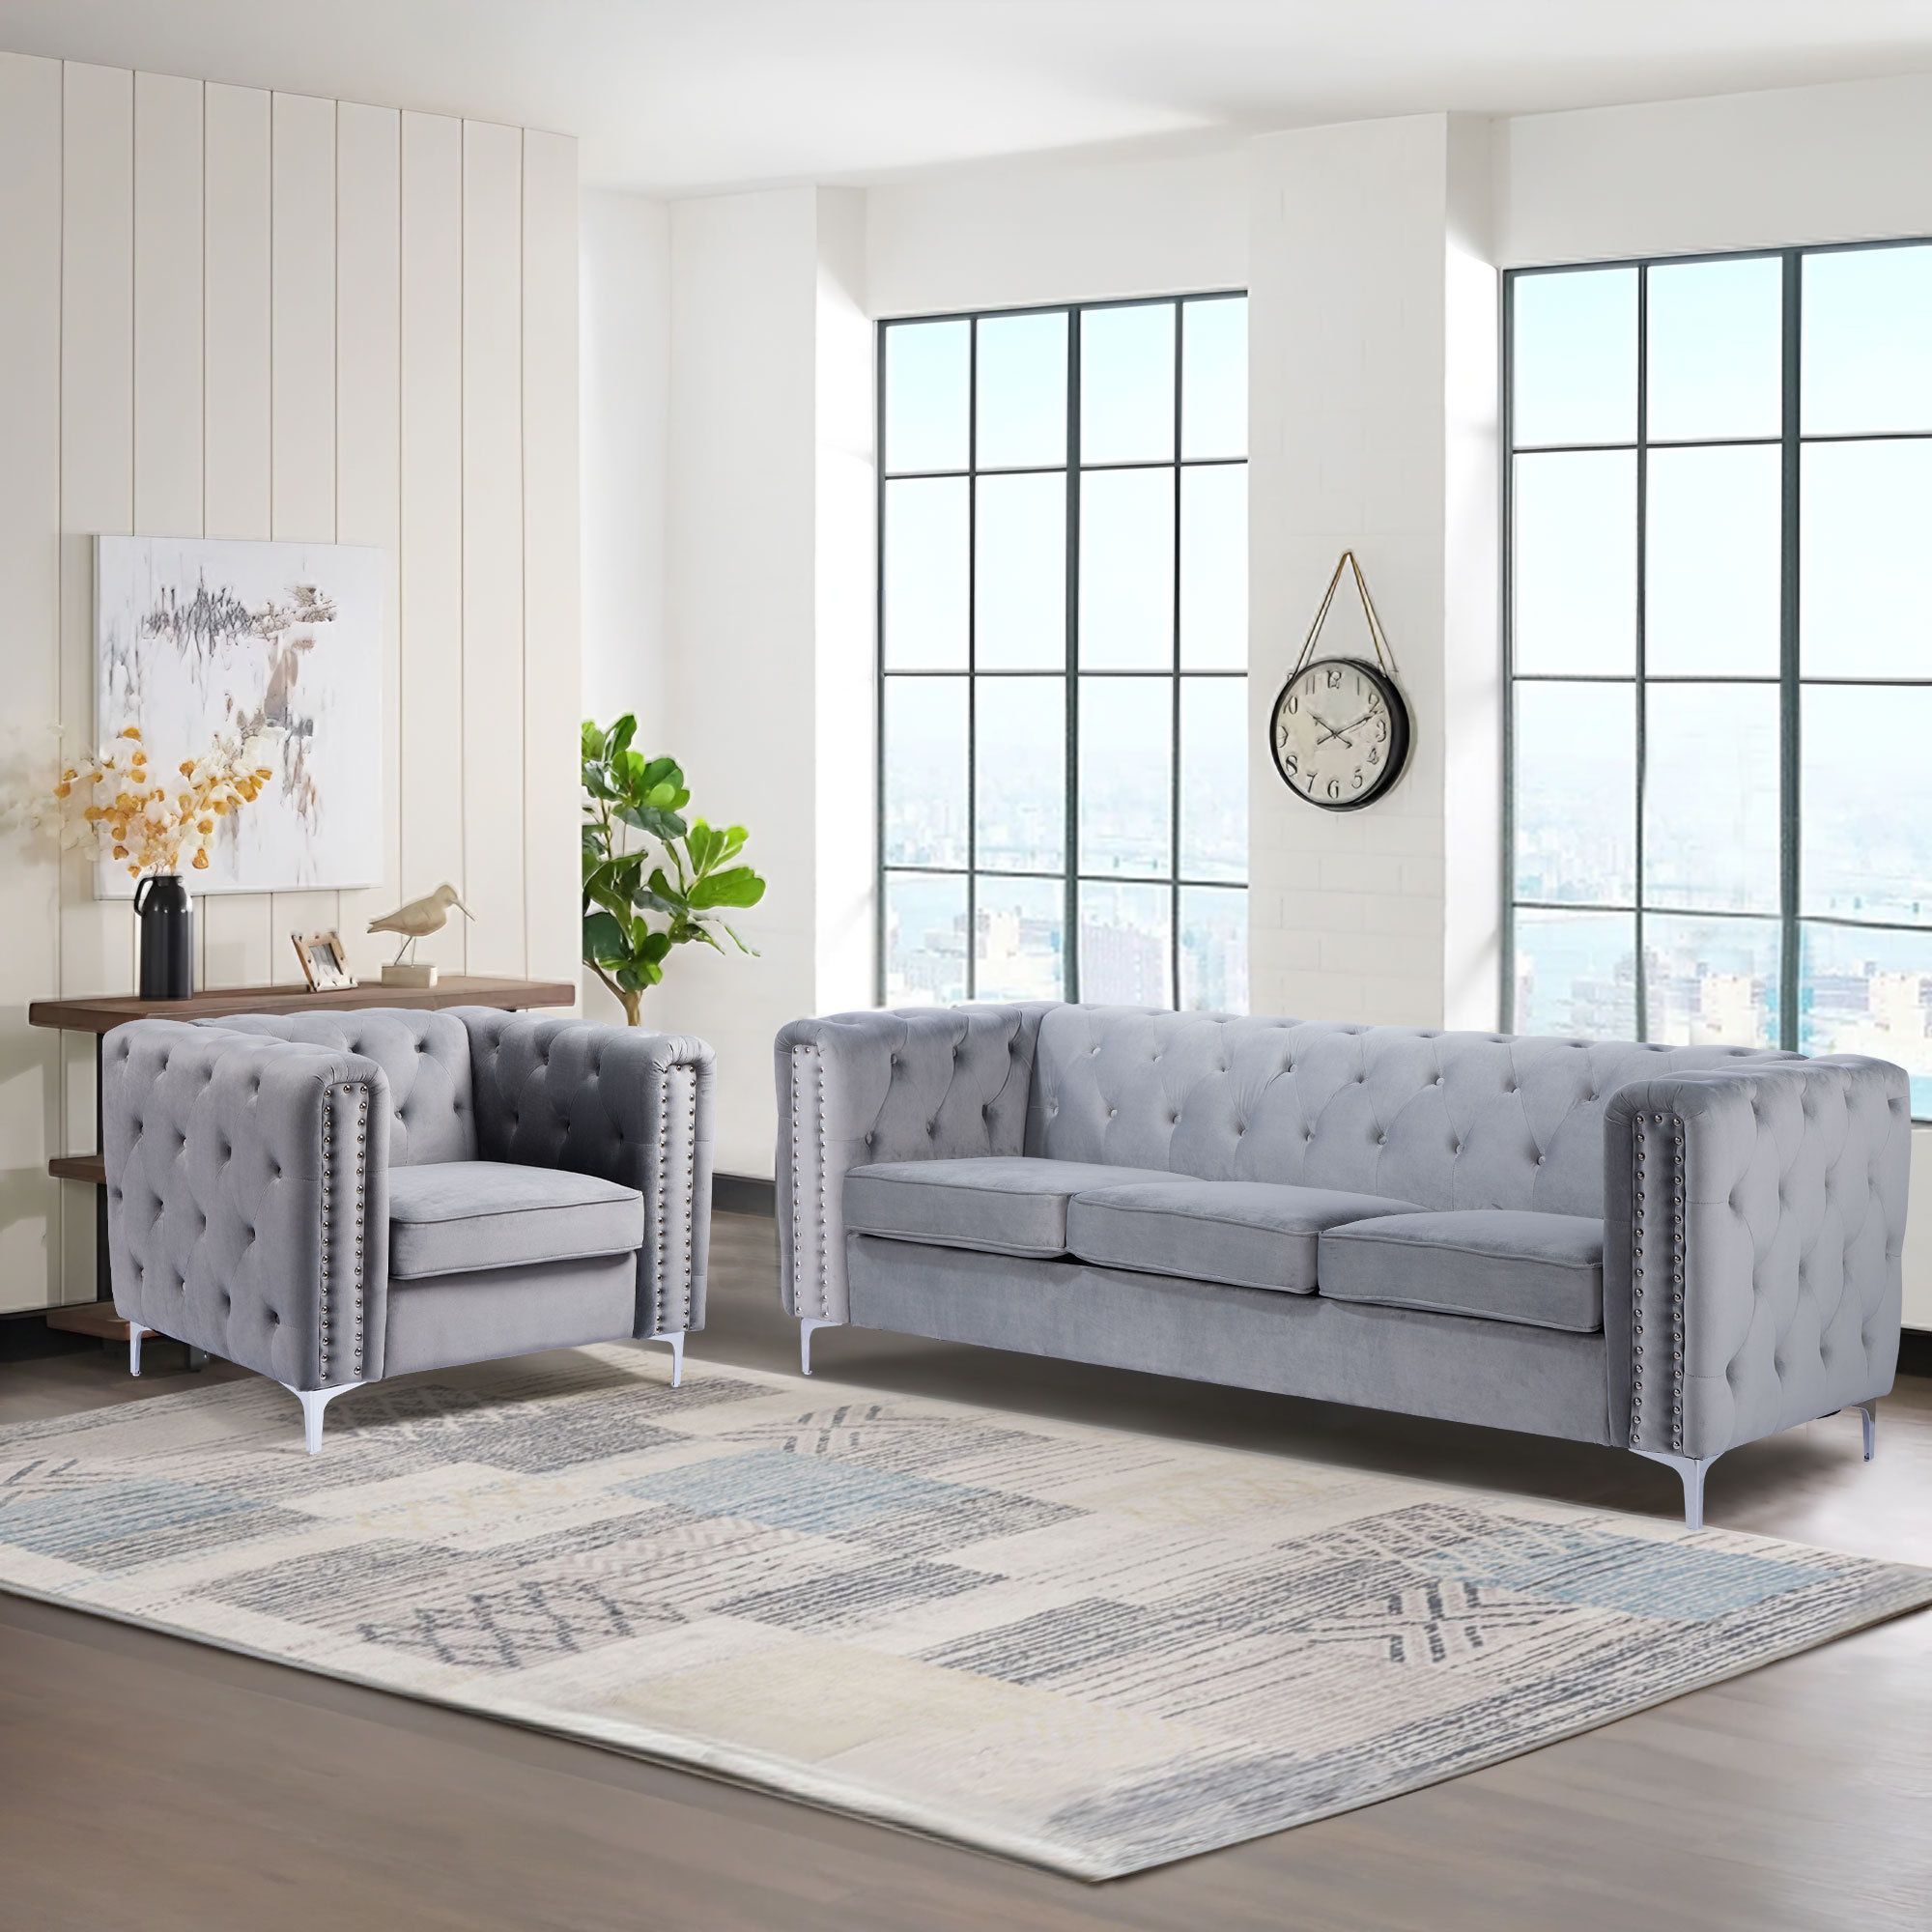 Bonzy Home Modern 2 Pieces Soft Upholstered Tufted Living Room Sofa Sets |  Wayfair Within Tufted Upholstered Sofas (View 2 of 15)